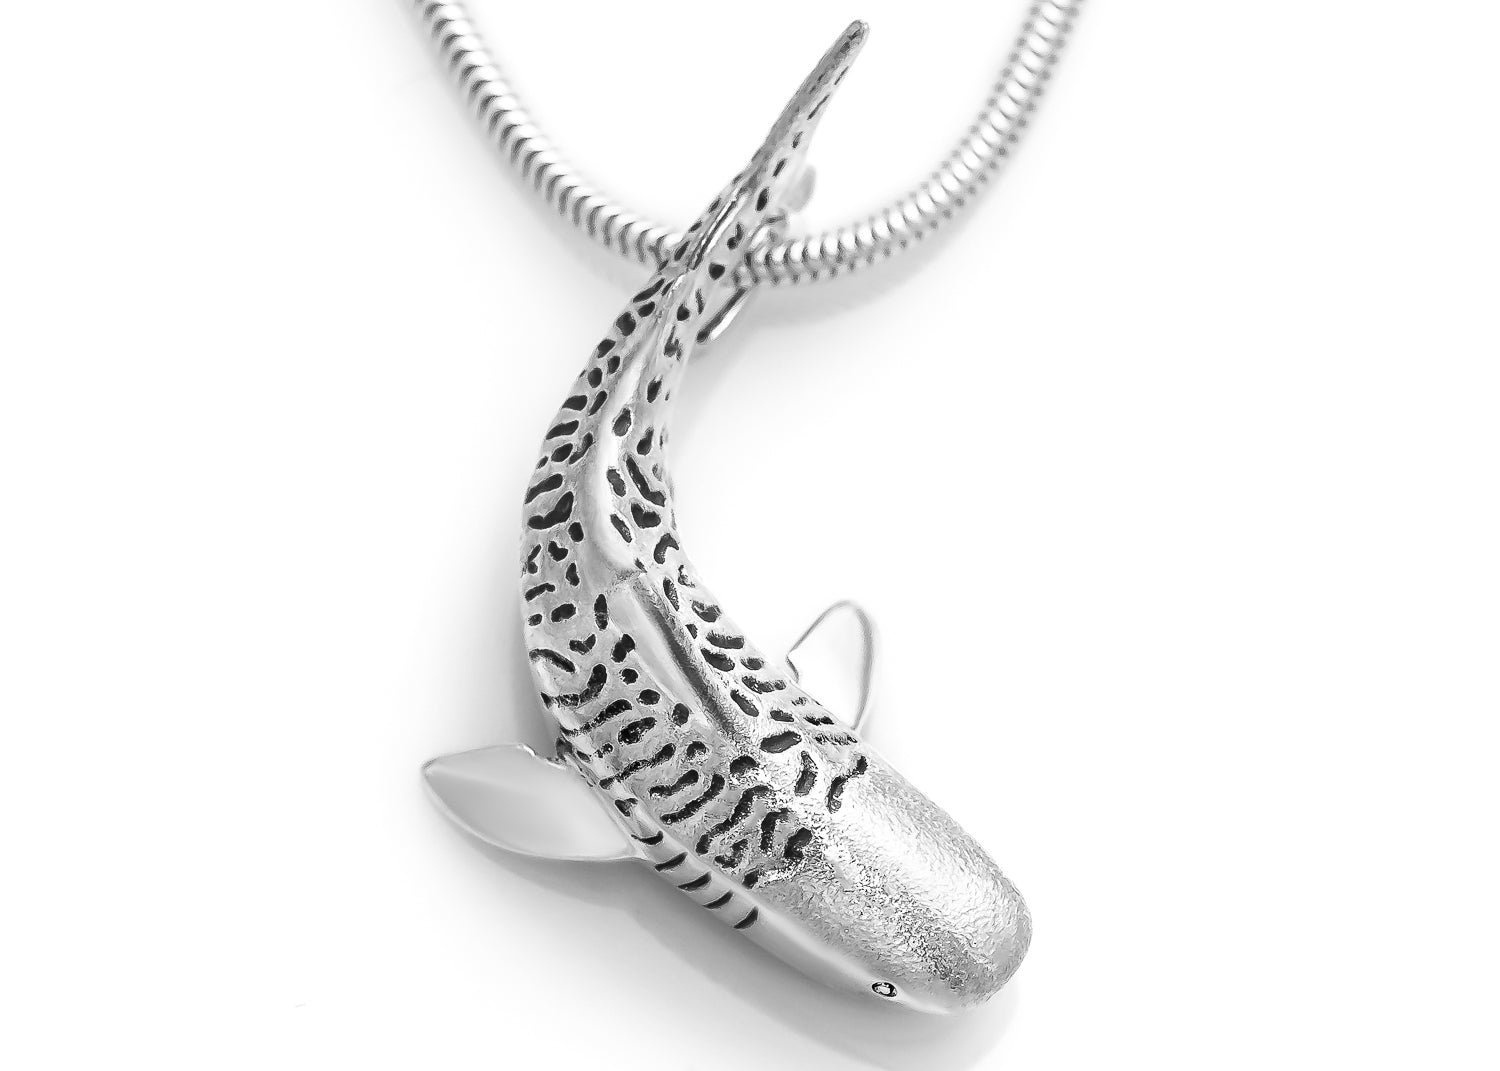 Buy Whale Shark Wood Charm Necklace Online in India - Etsy